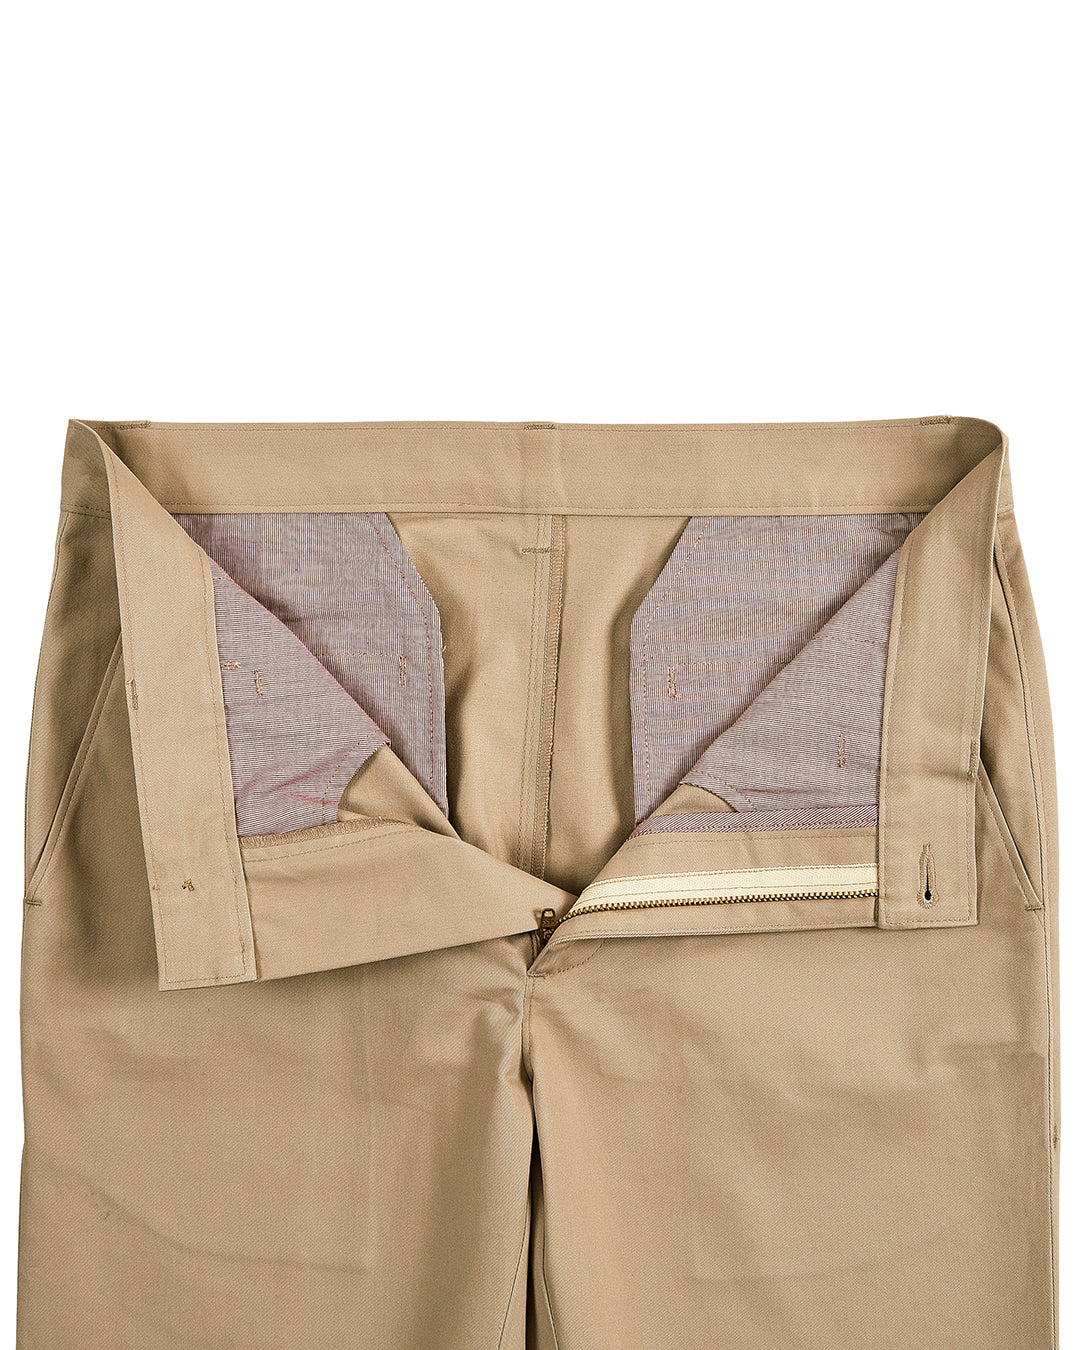 Open front view of custom Genoa Chino pants for men by Luxire in beige